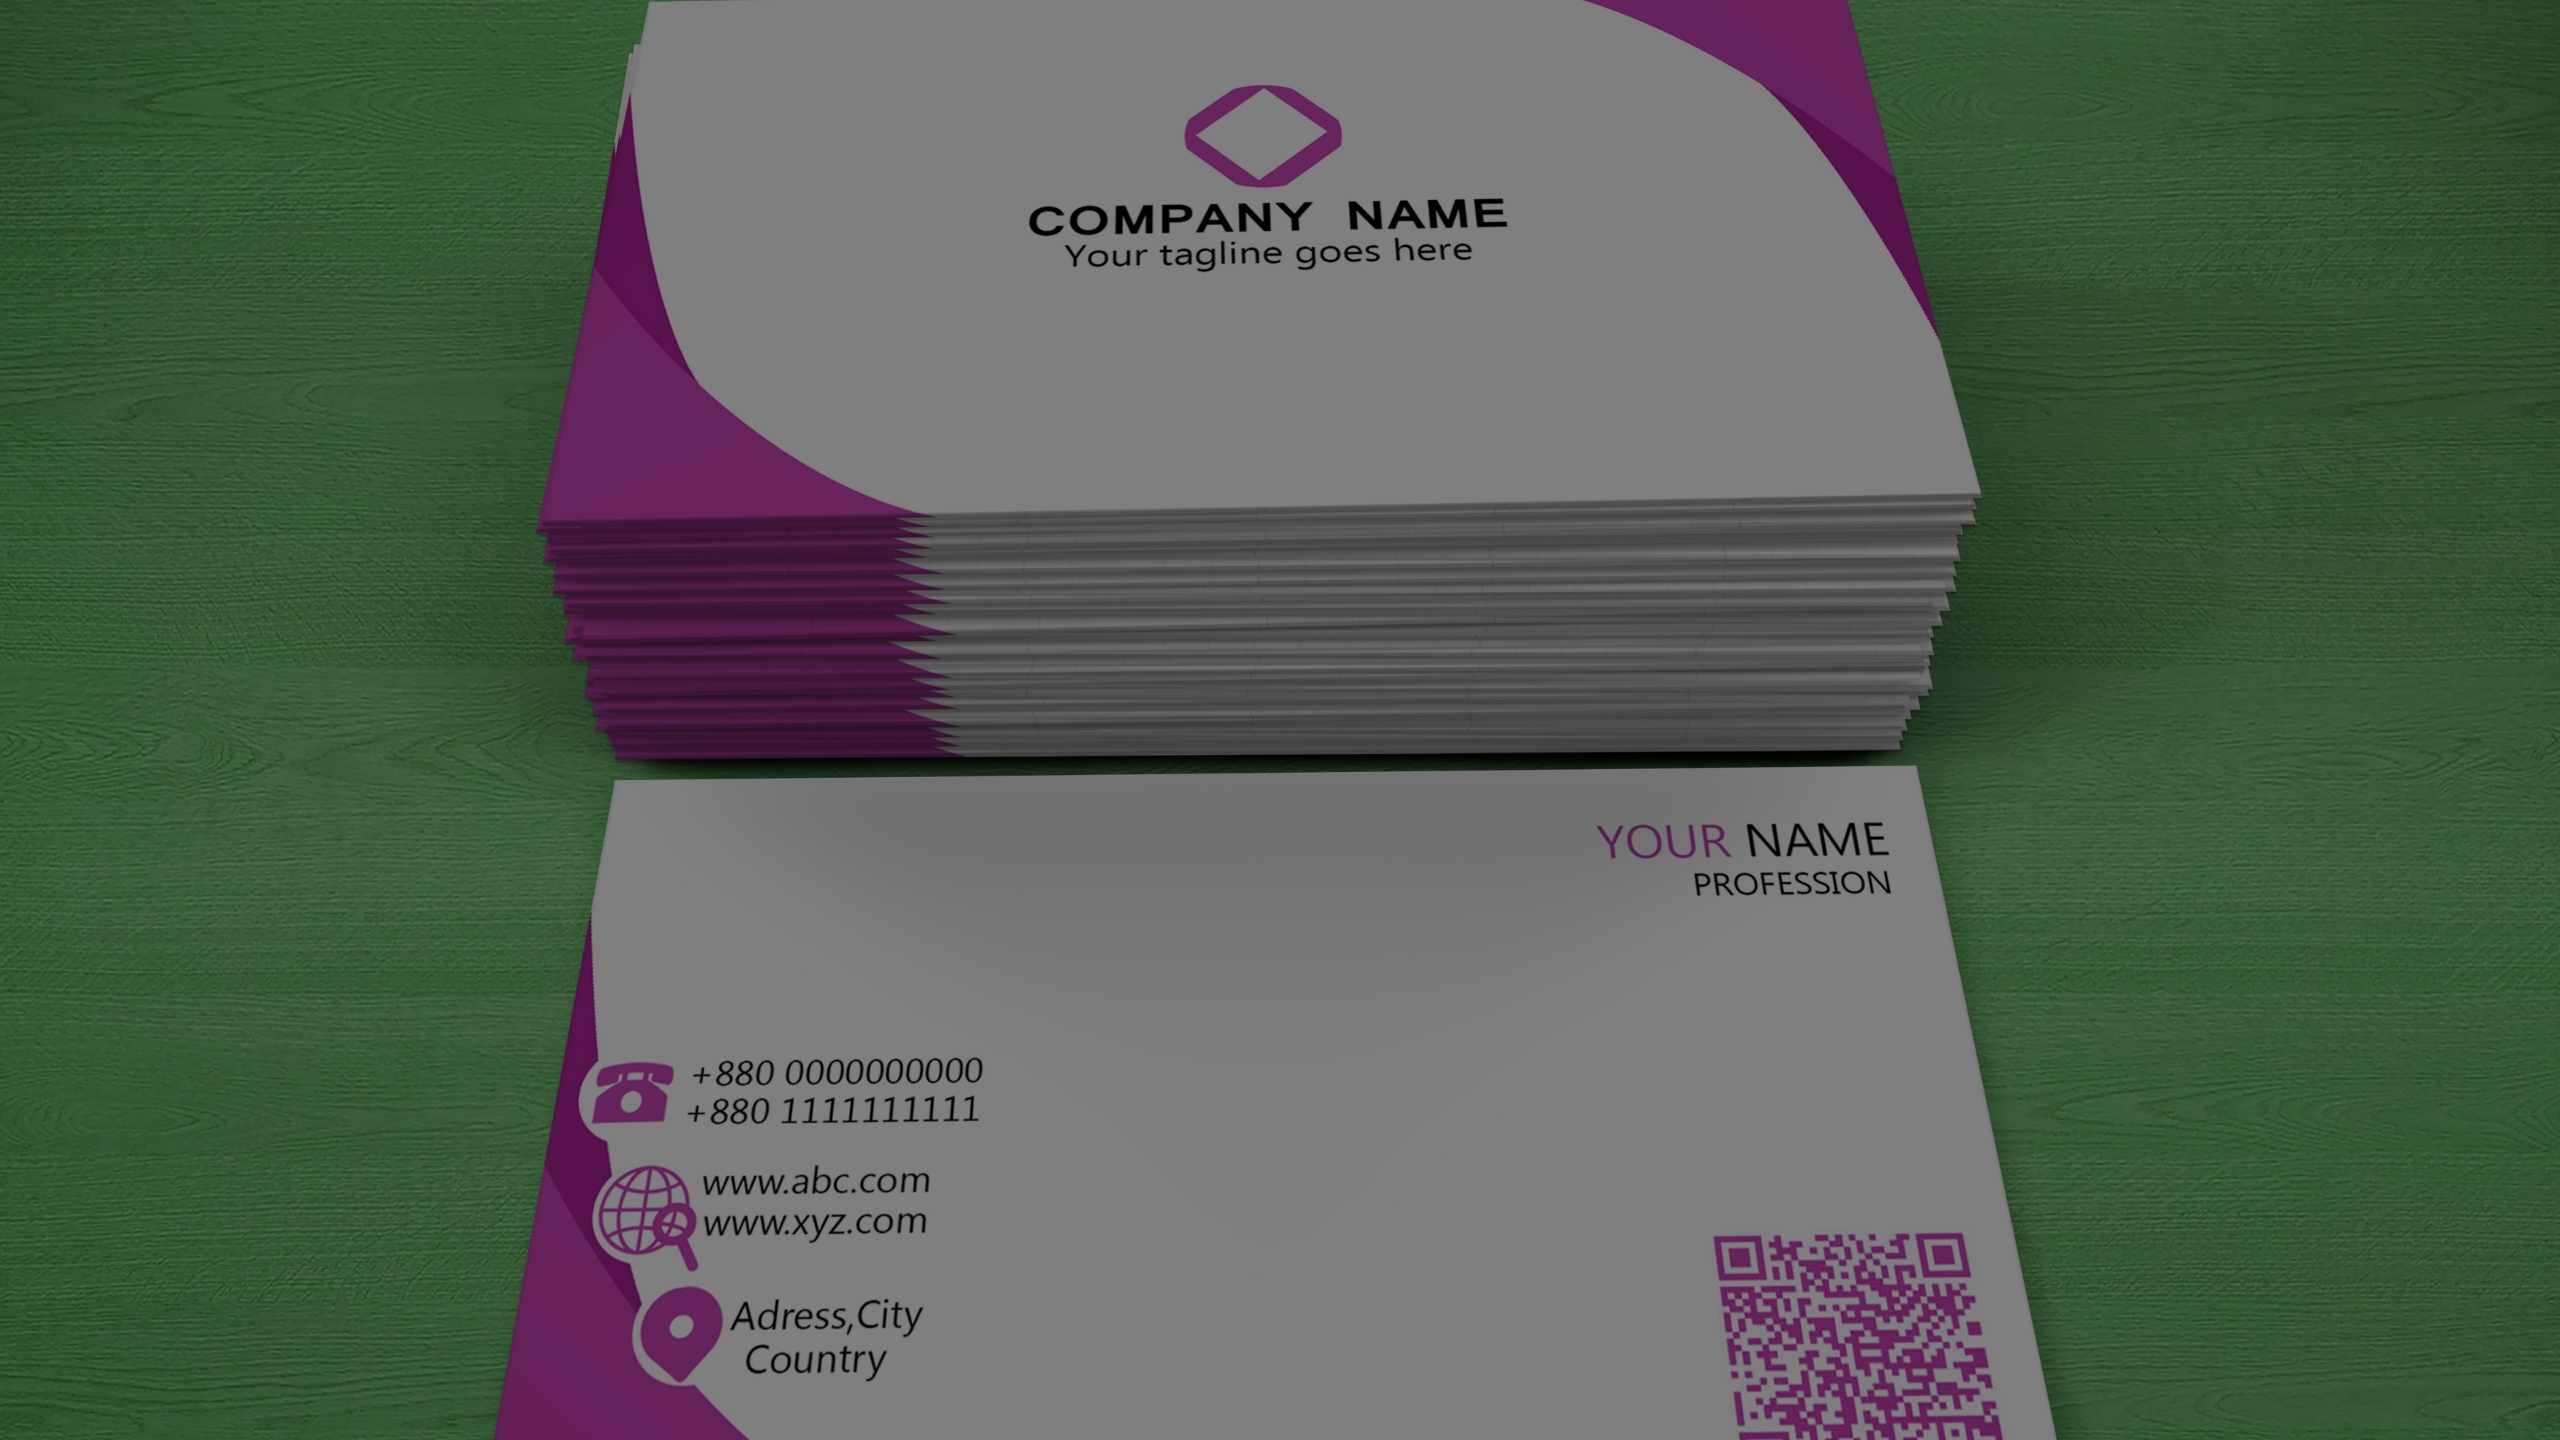 100 Business Cards For $19.09‬